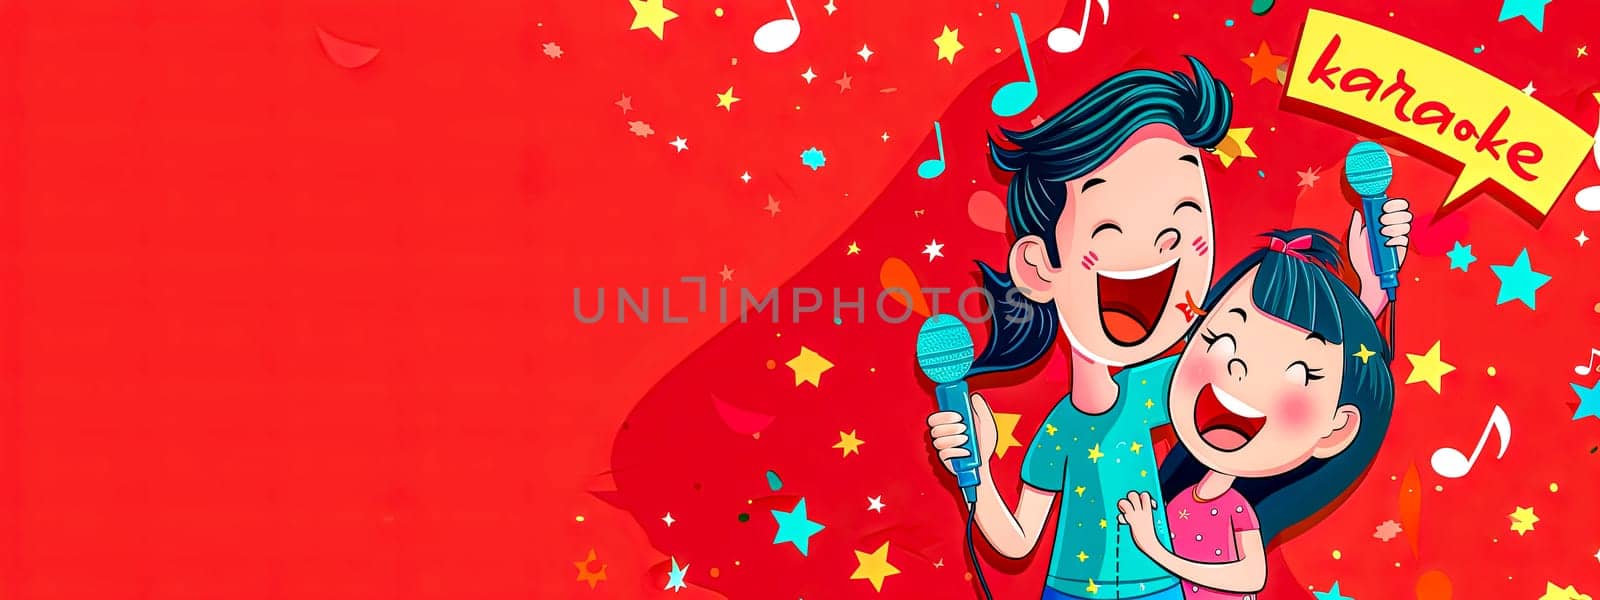 Exciting and joyful cartoon karaoke night with children singing together in playful animation characters and red background for fun entertainment and celebration of friendship and music-filled leisure activity